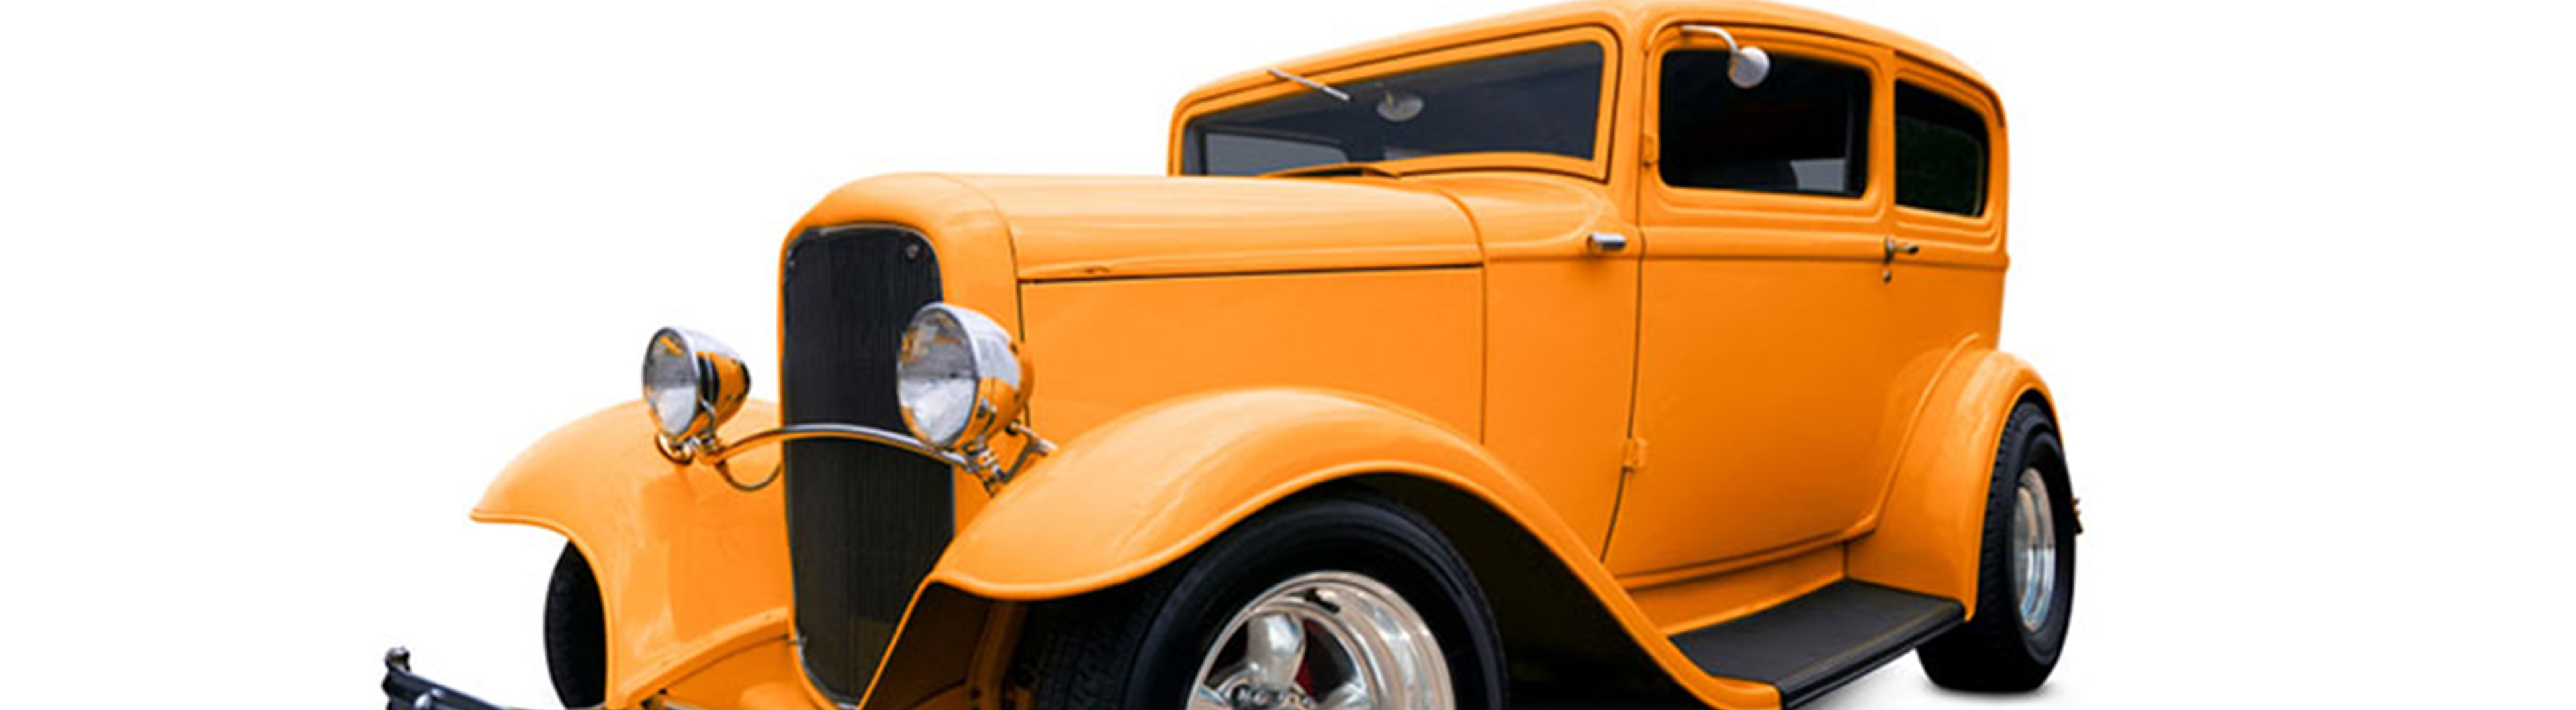 New York Classic Car insurance coverage